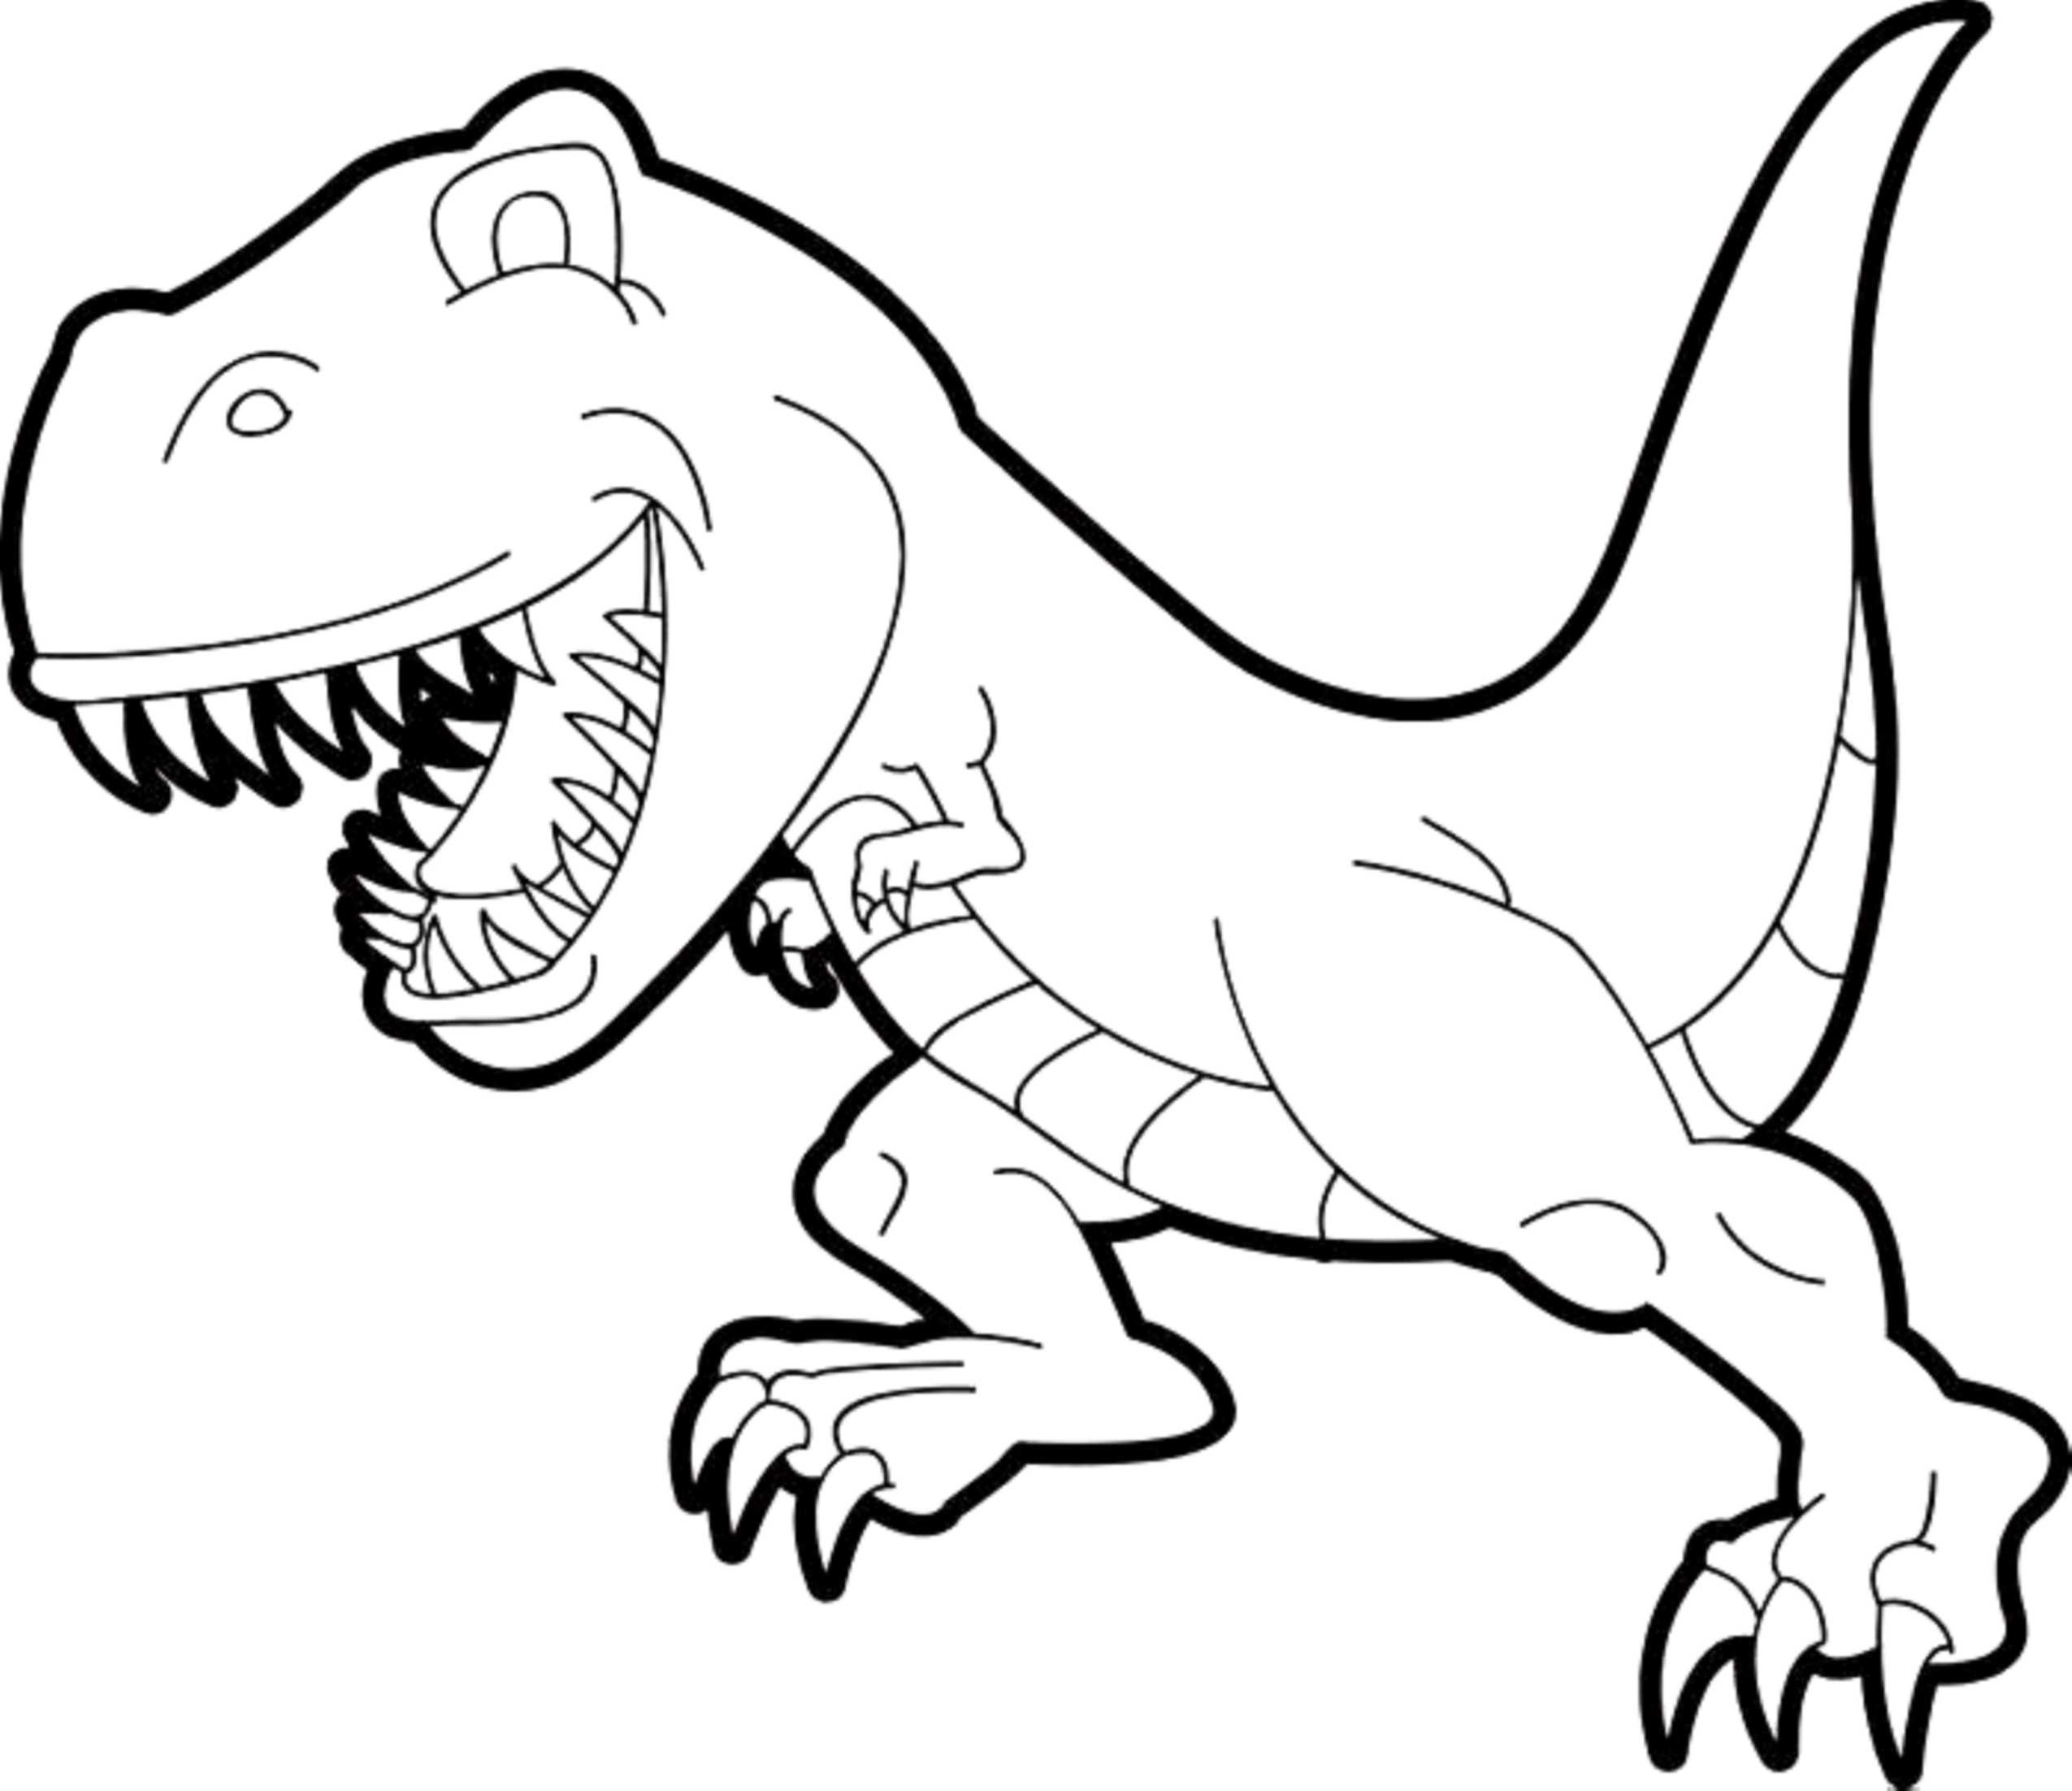 Coloring Pages For Kids Dinosaur
 Print & Download Dinosaur T Rex Coloring Pages for Kids